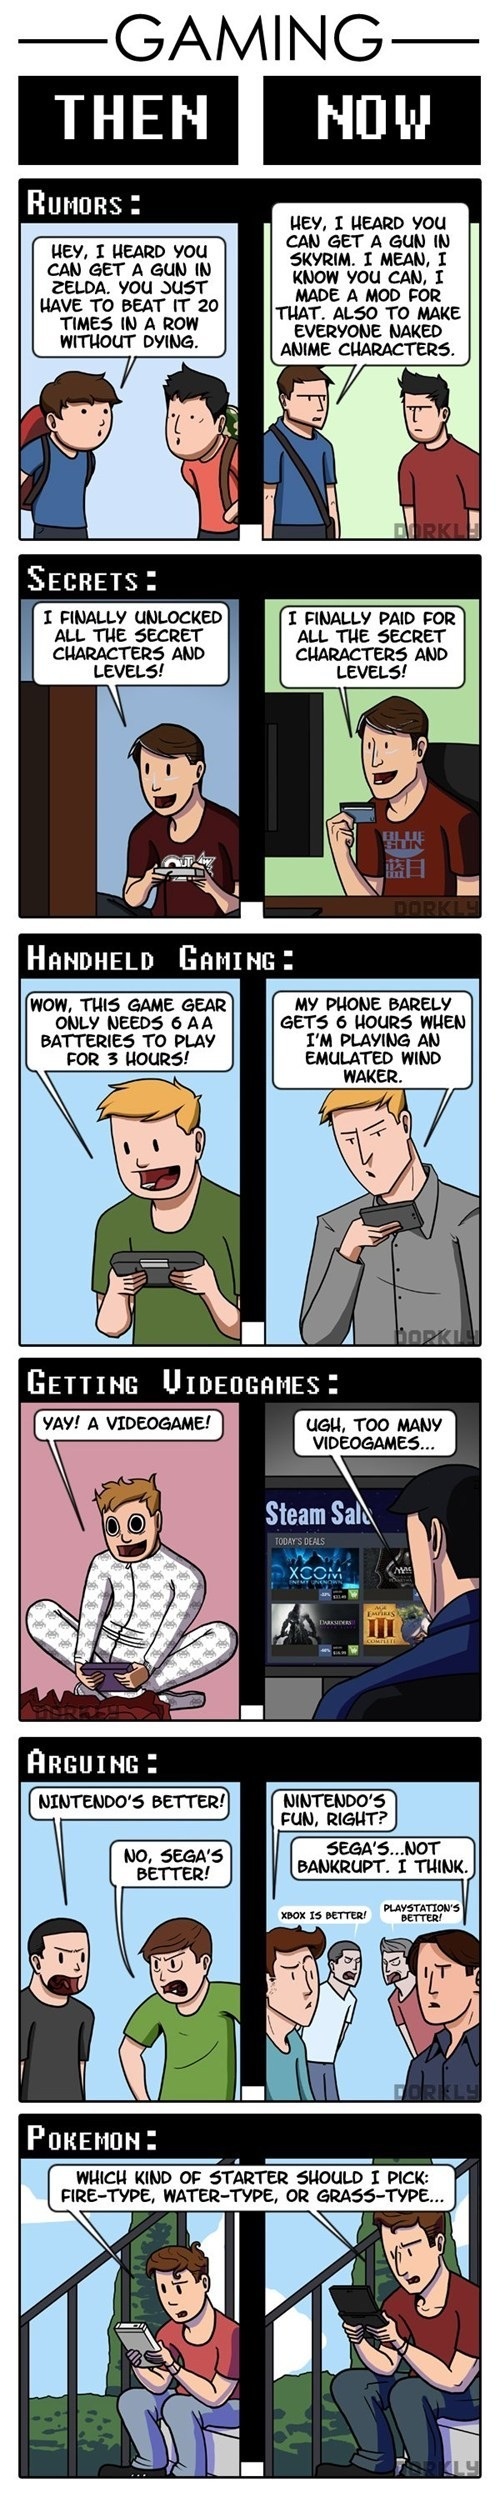 Video games then and now